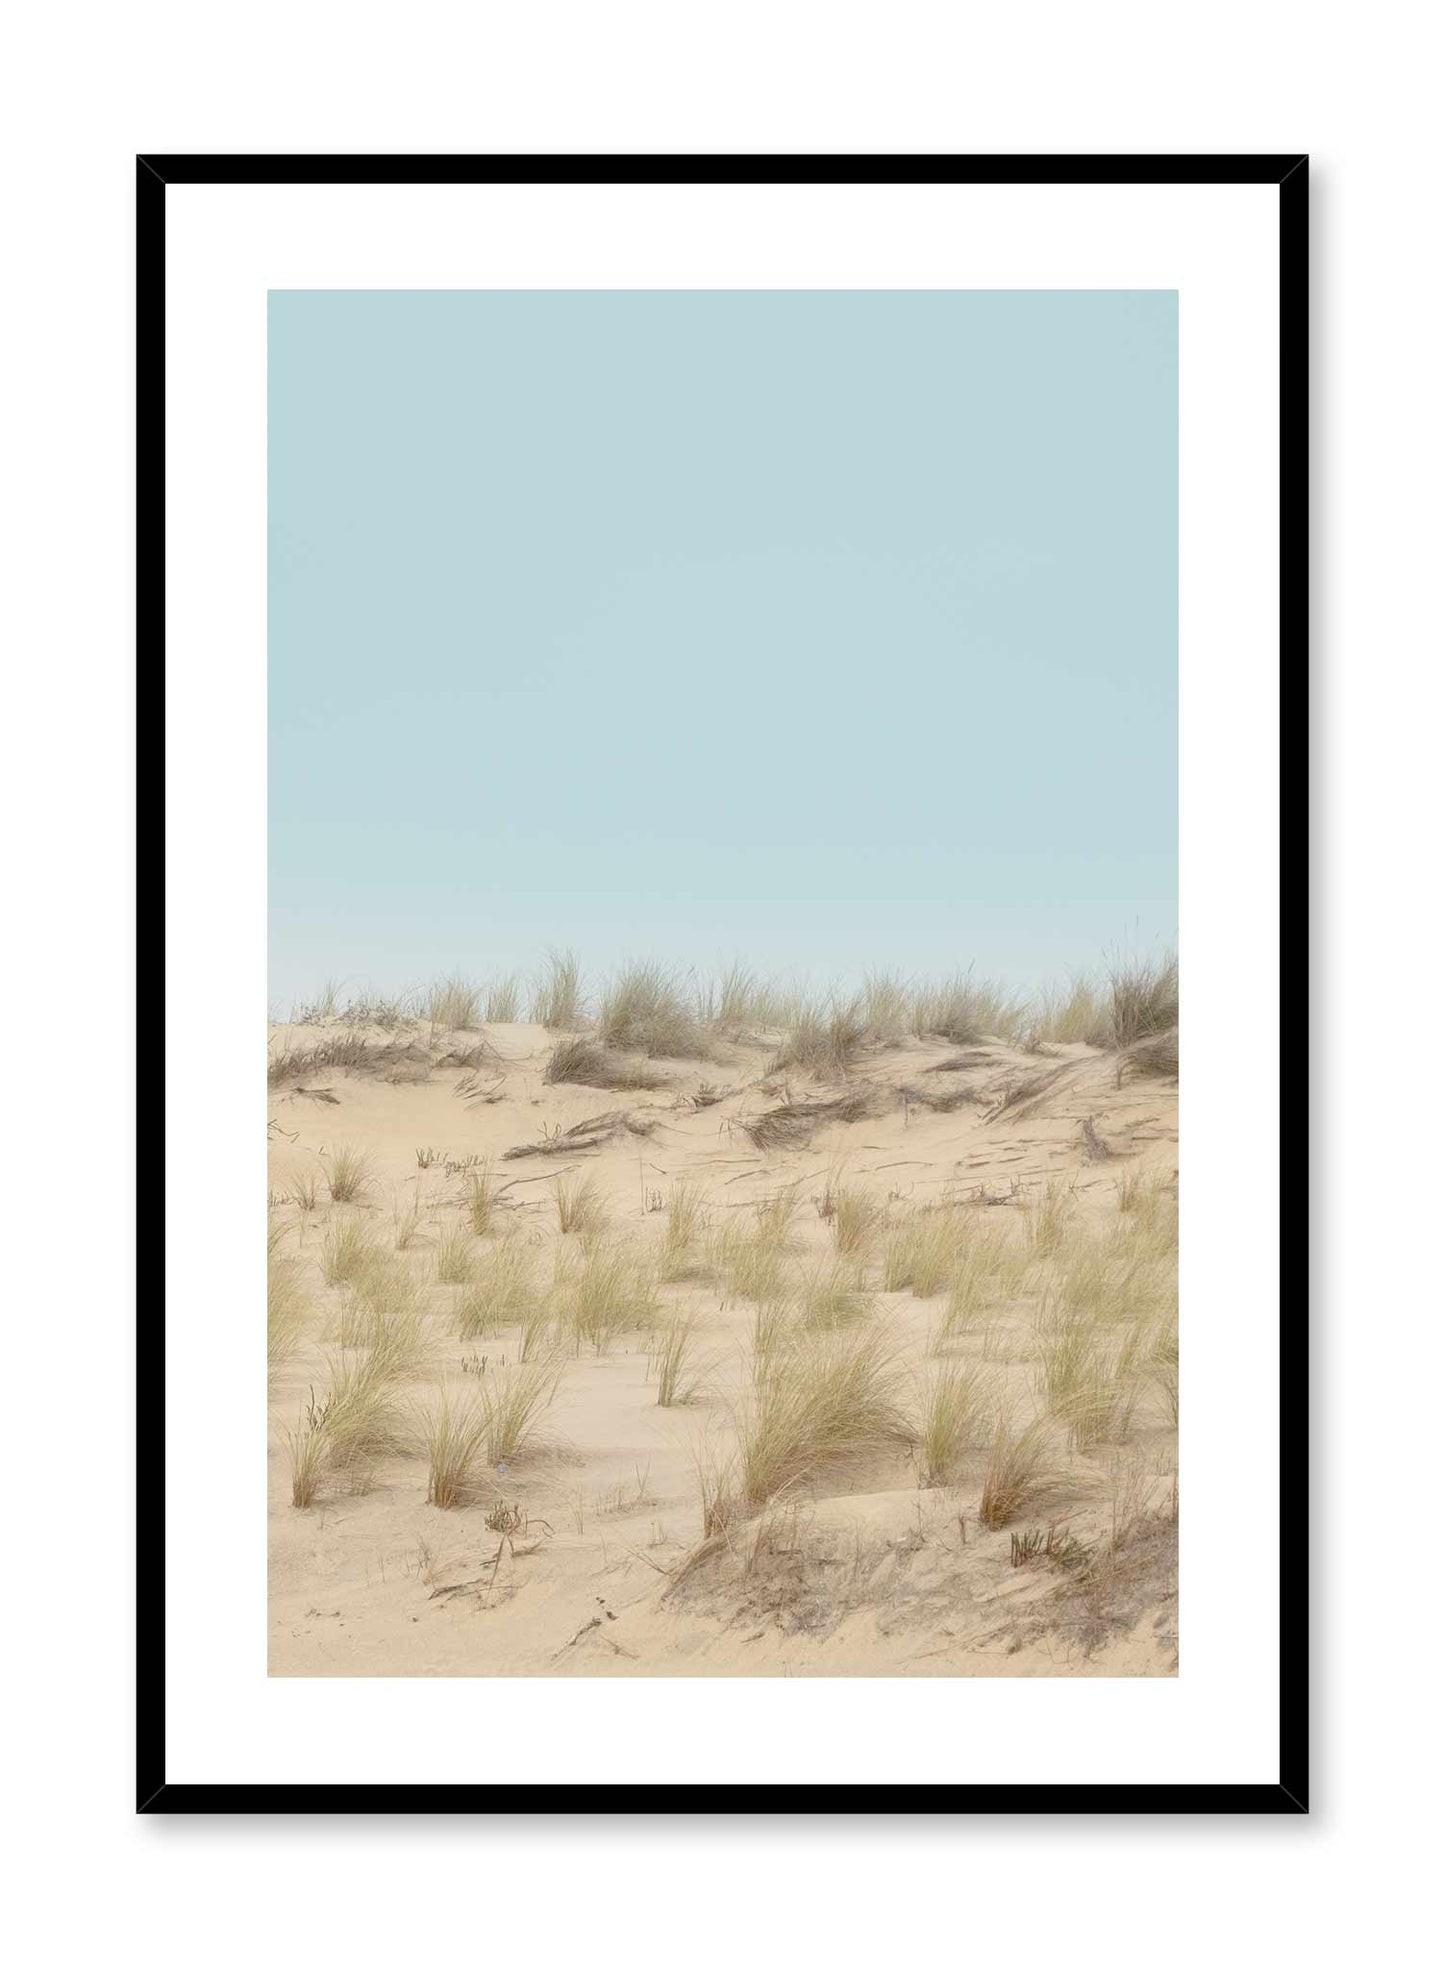 Windy Dune is a minimalist photography of a patch of short beach grass spread over the beach by Opposite Wall.